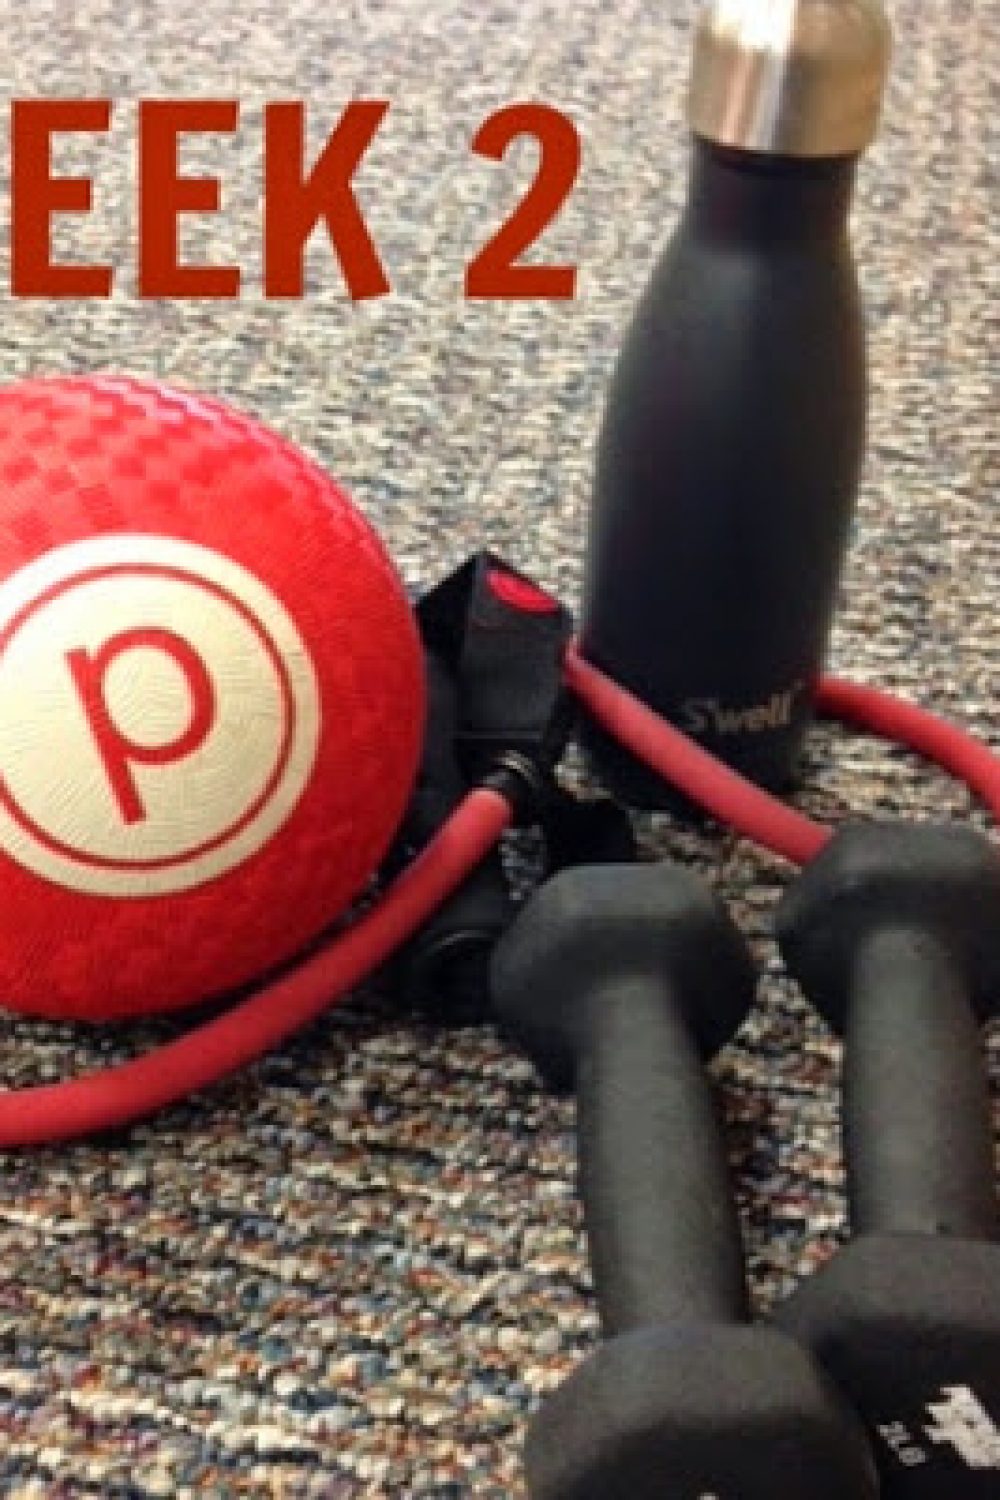 Trimdown Thursday: What I’ve Learned at Pure Barre